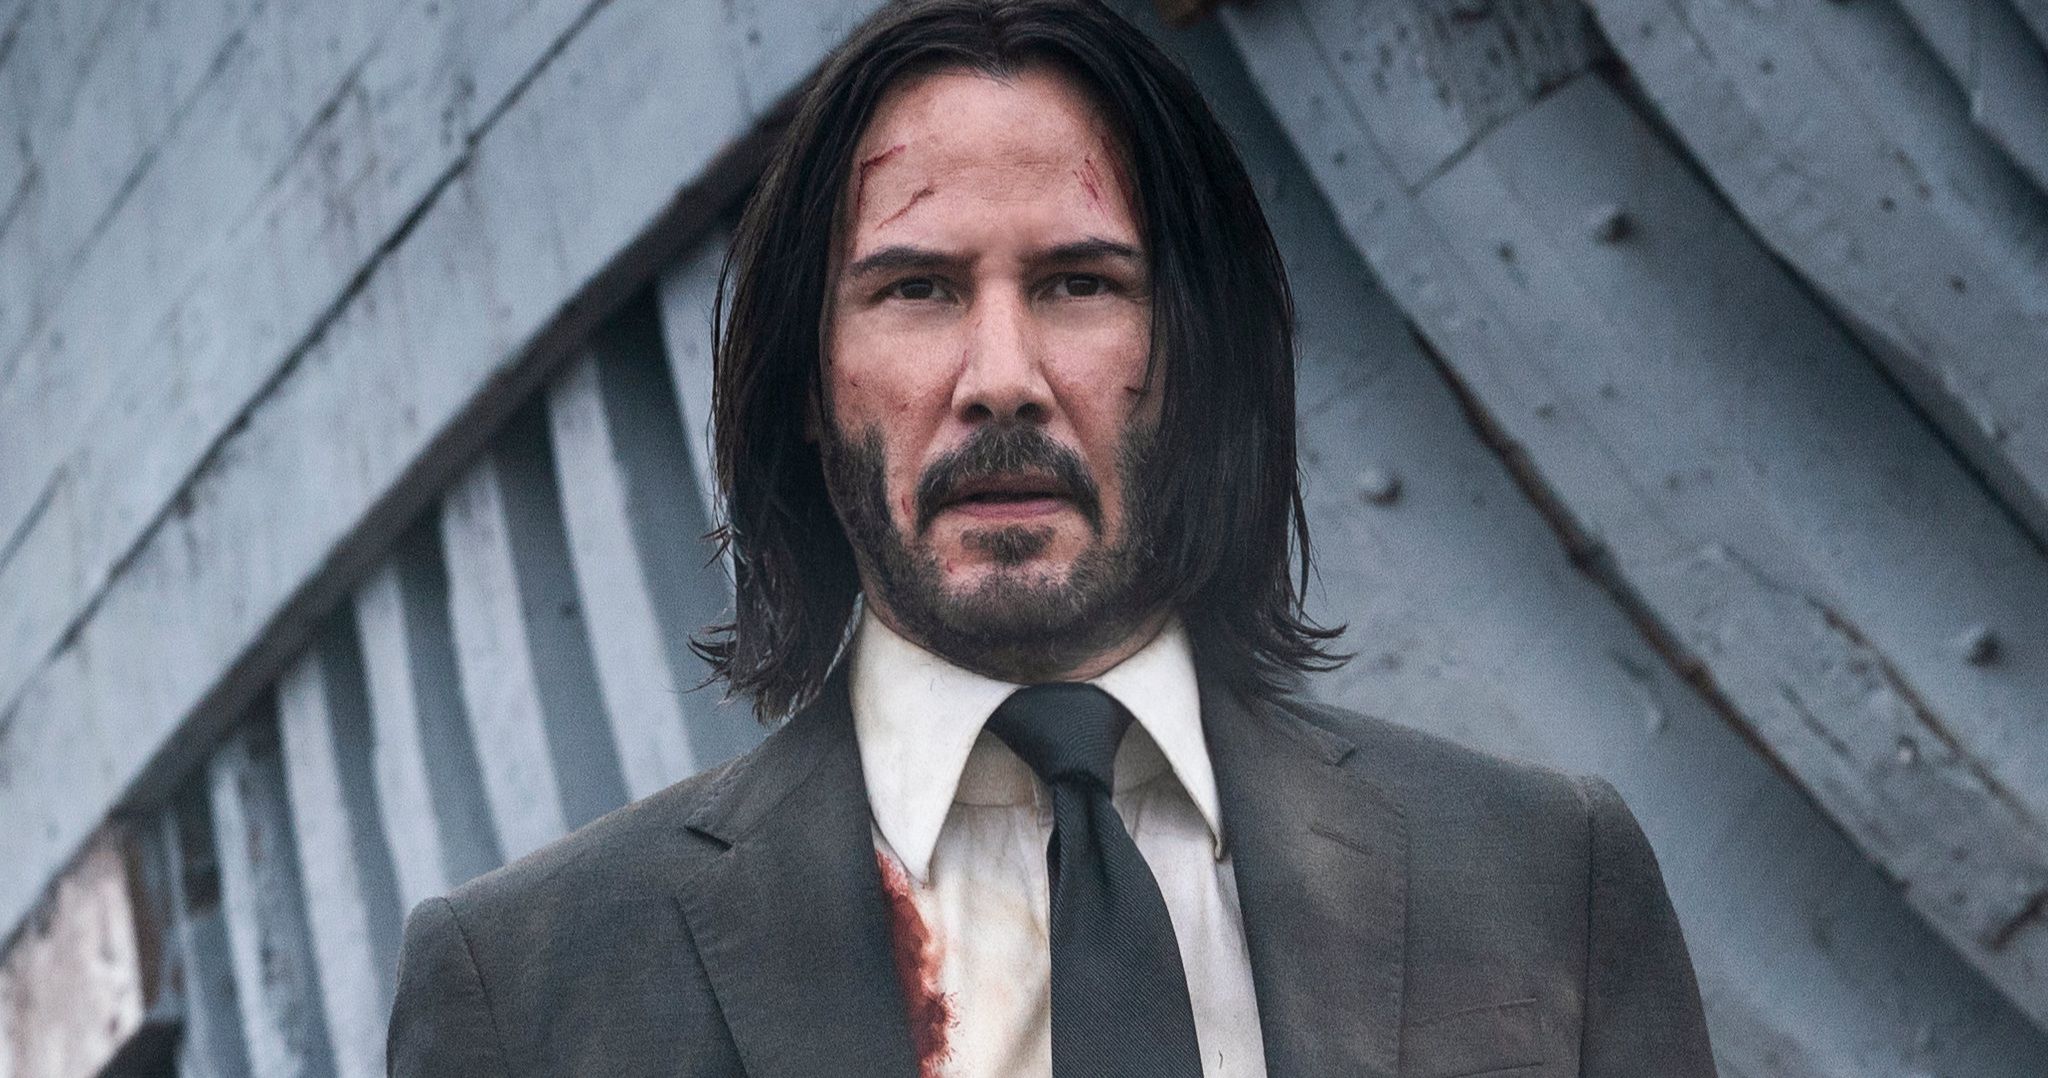 Intense John Wick Workout That Keeps Keanu Reeves in Shape Revealed by His Personal Trainer